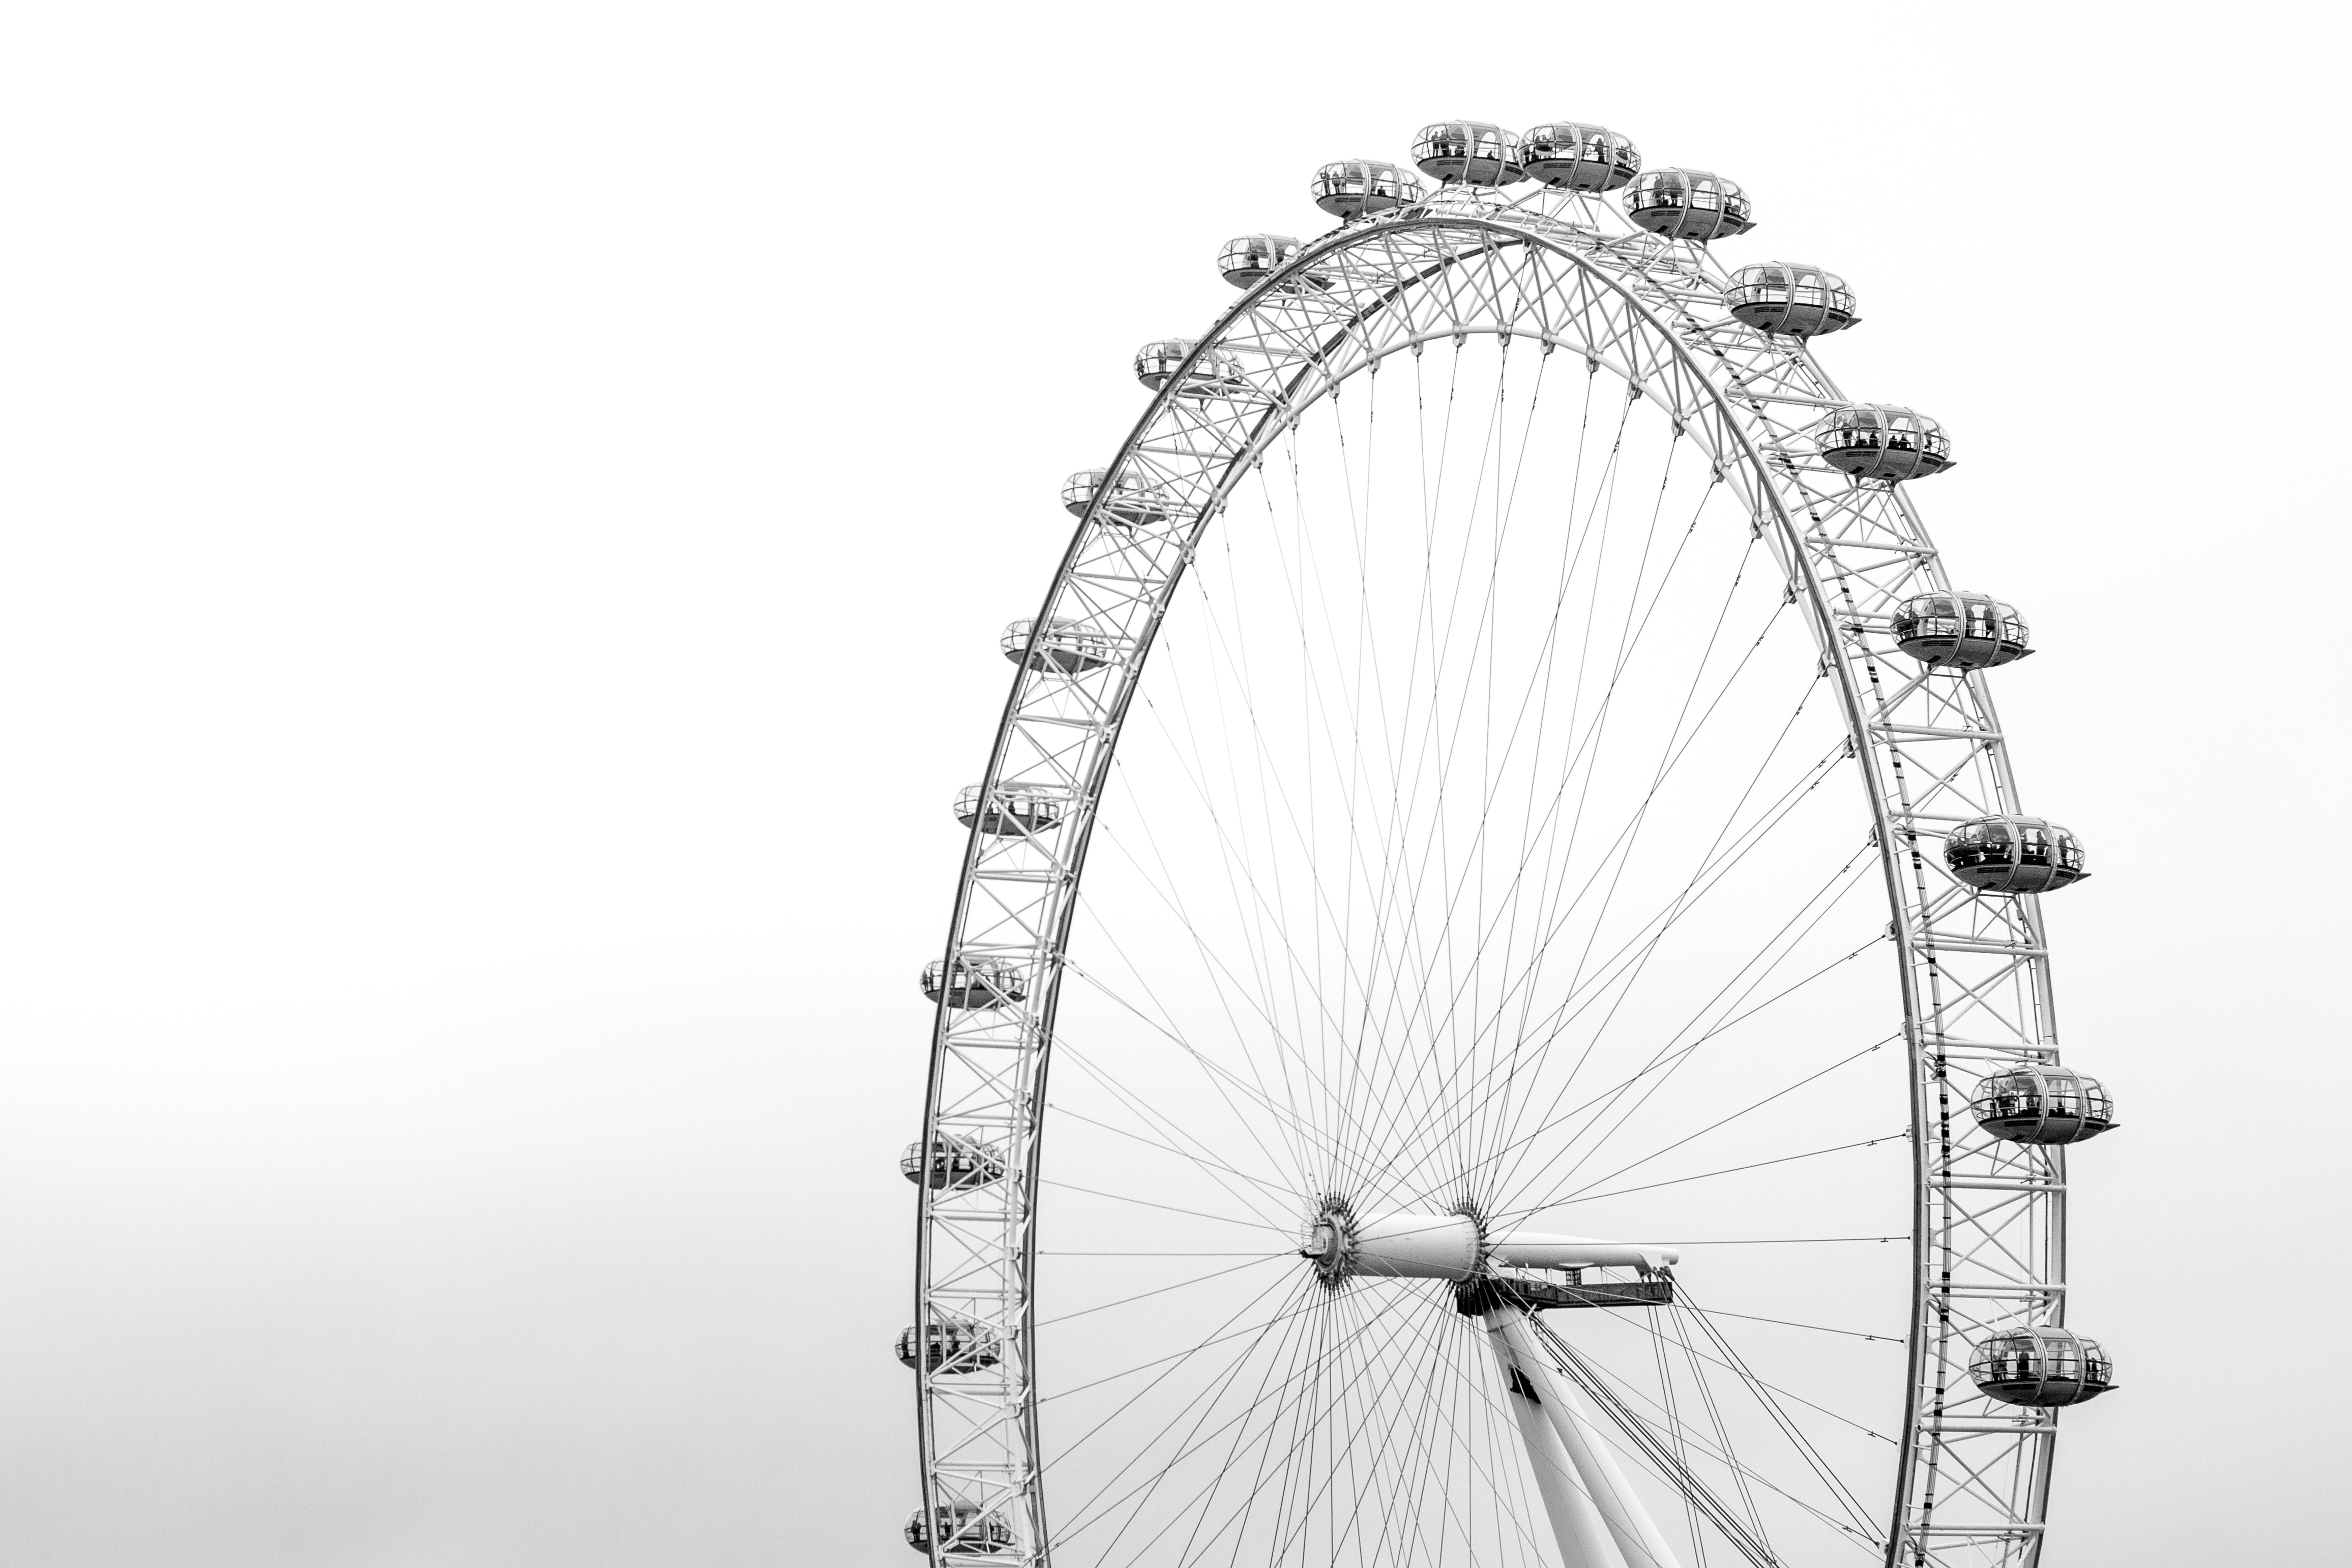 4624x3083 england, cloudy, abstract, height, london, sightseeing, ferrys wheel, millenium, ferris wheel, thame, london eye, ferri, attraction park, minimalist, wallpaper, capsule, black and white, minimal, Creative Commons image, tour